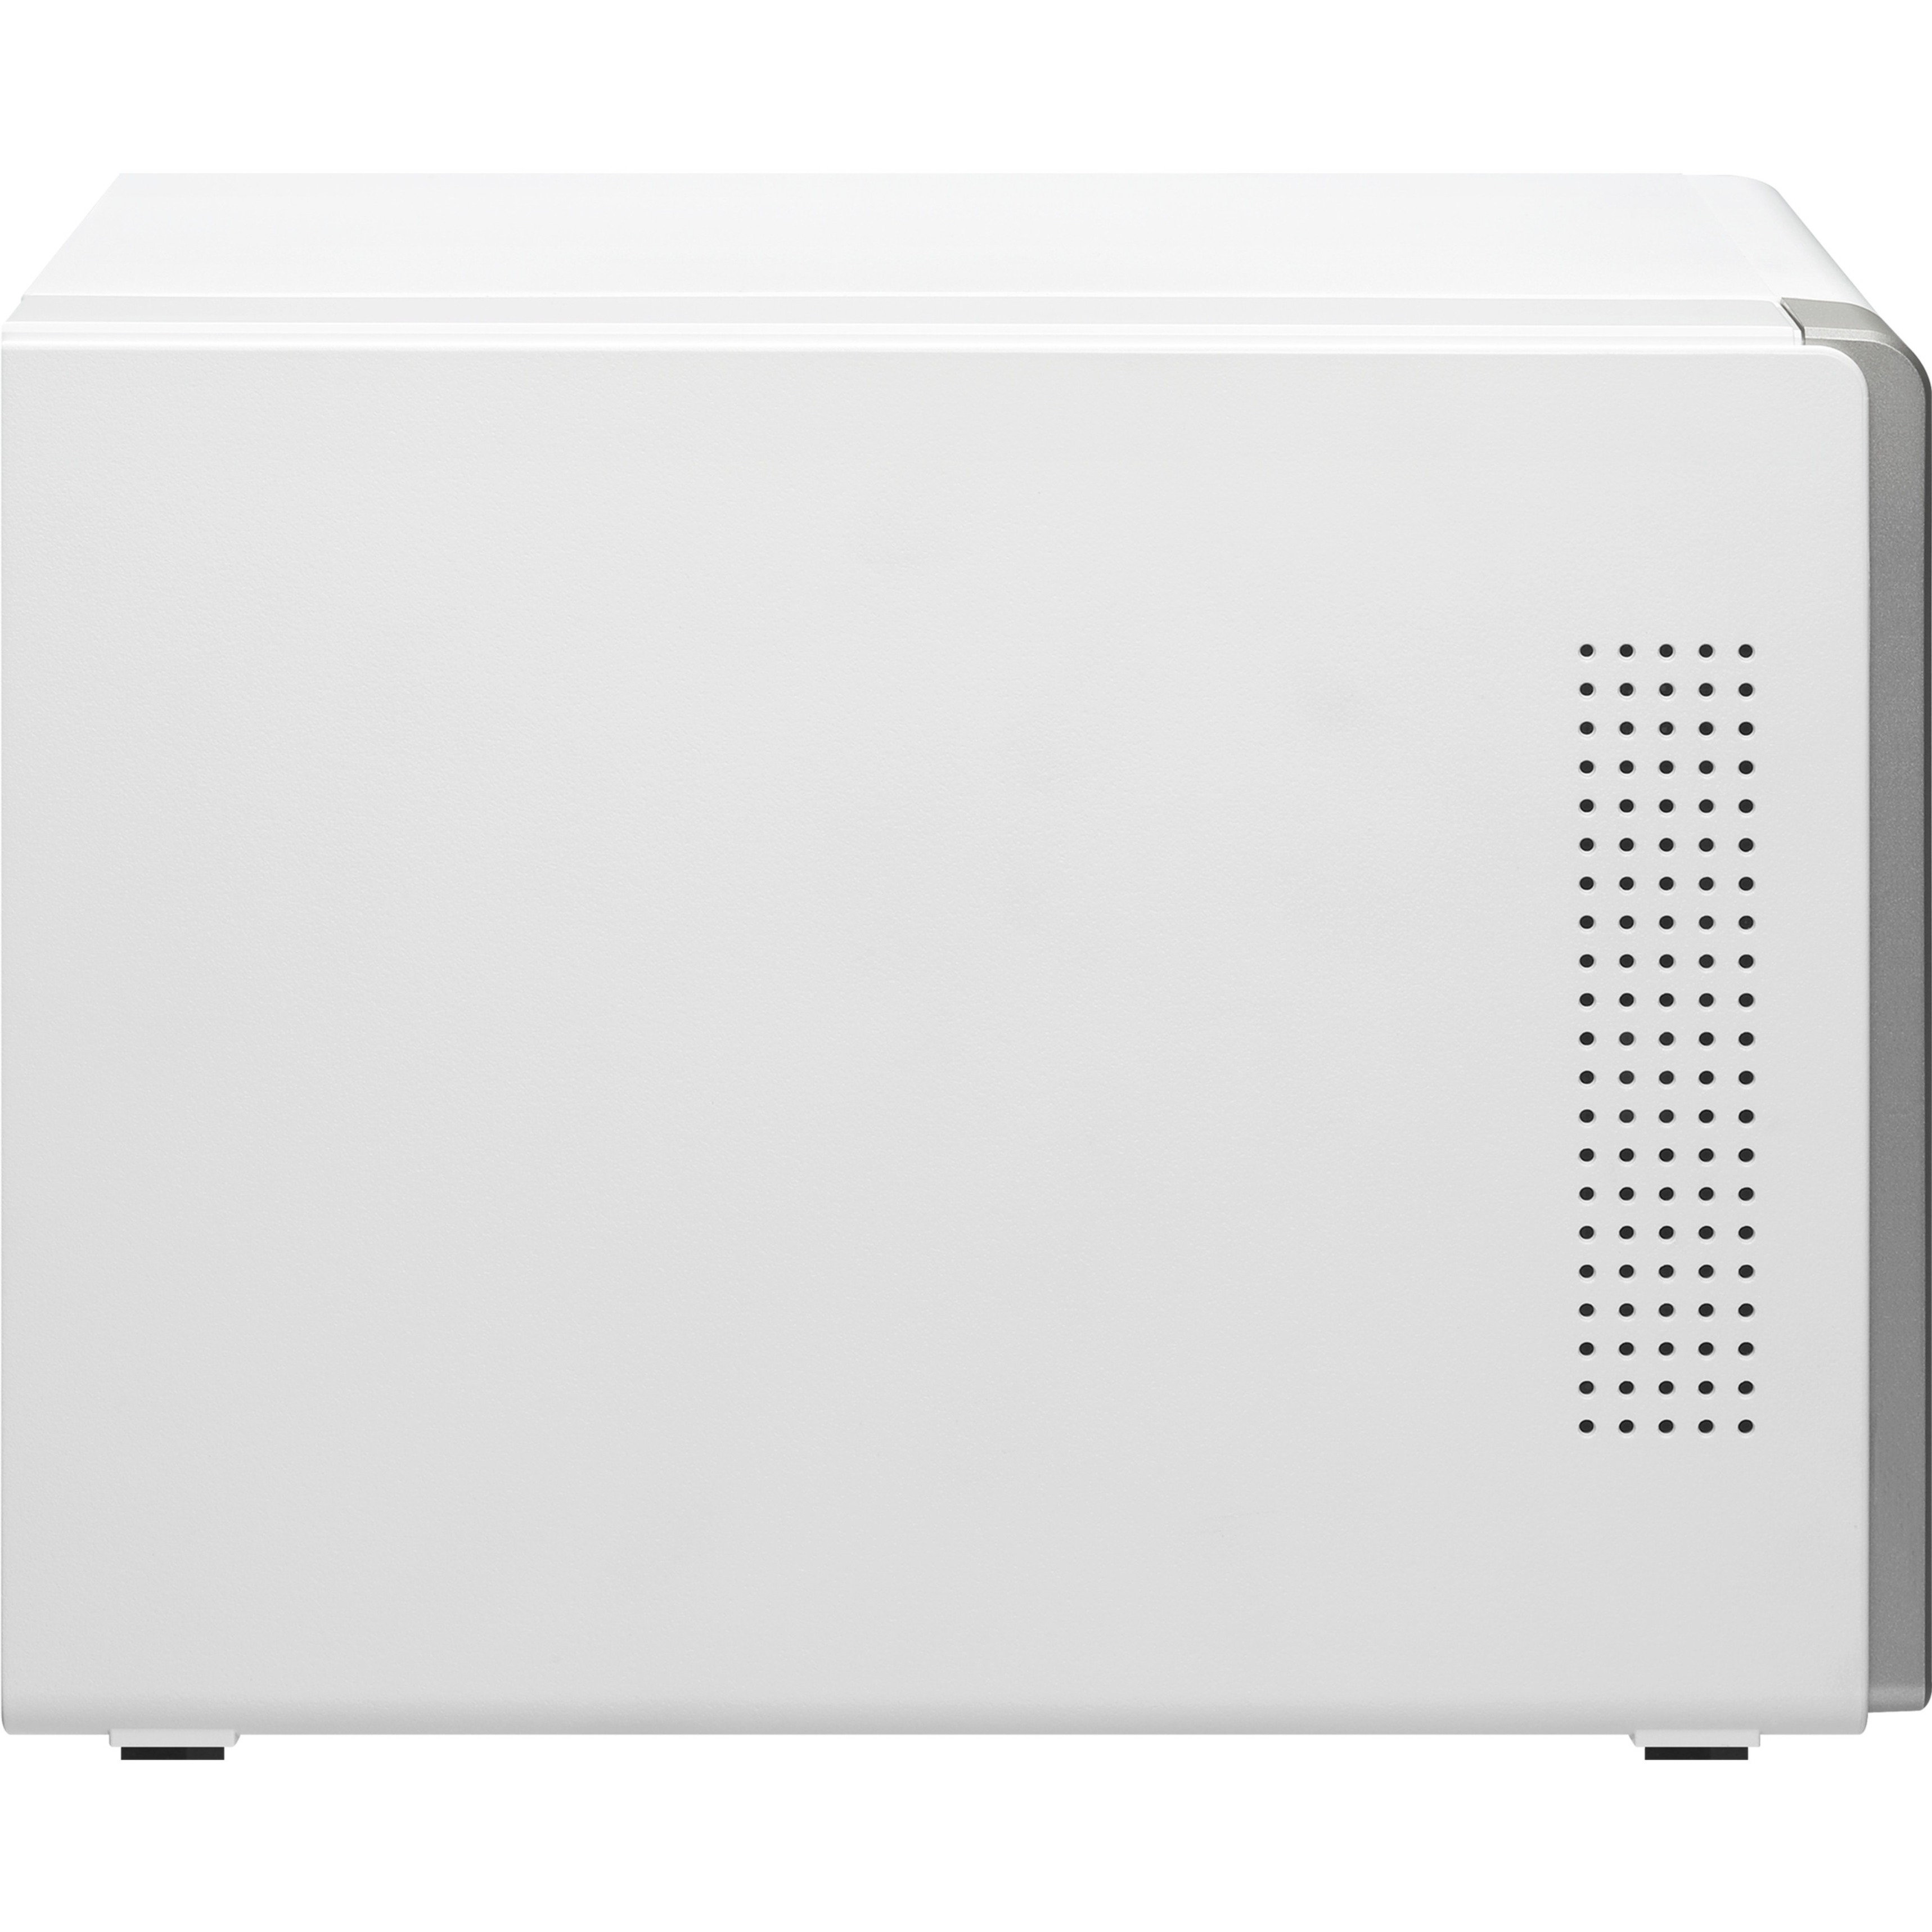 QNAP TS-431P2 4-bay Personal Cloud NAS with DLNA, 1GB RAM - image 4 of 9